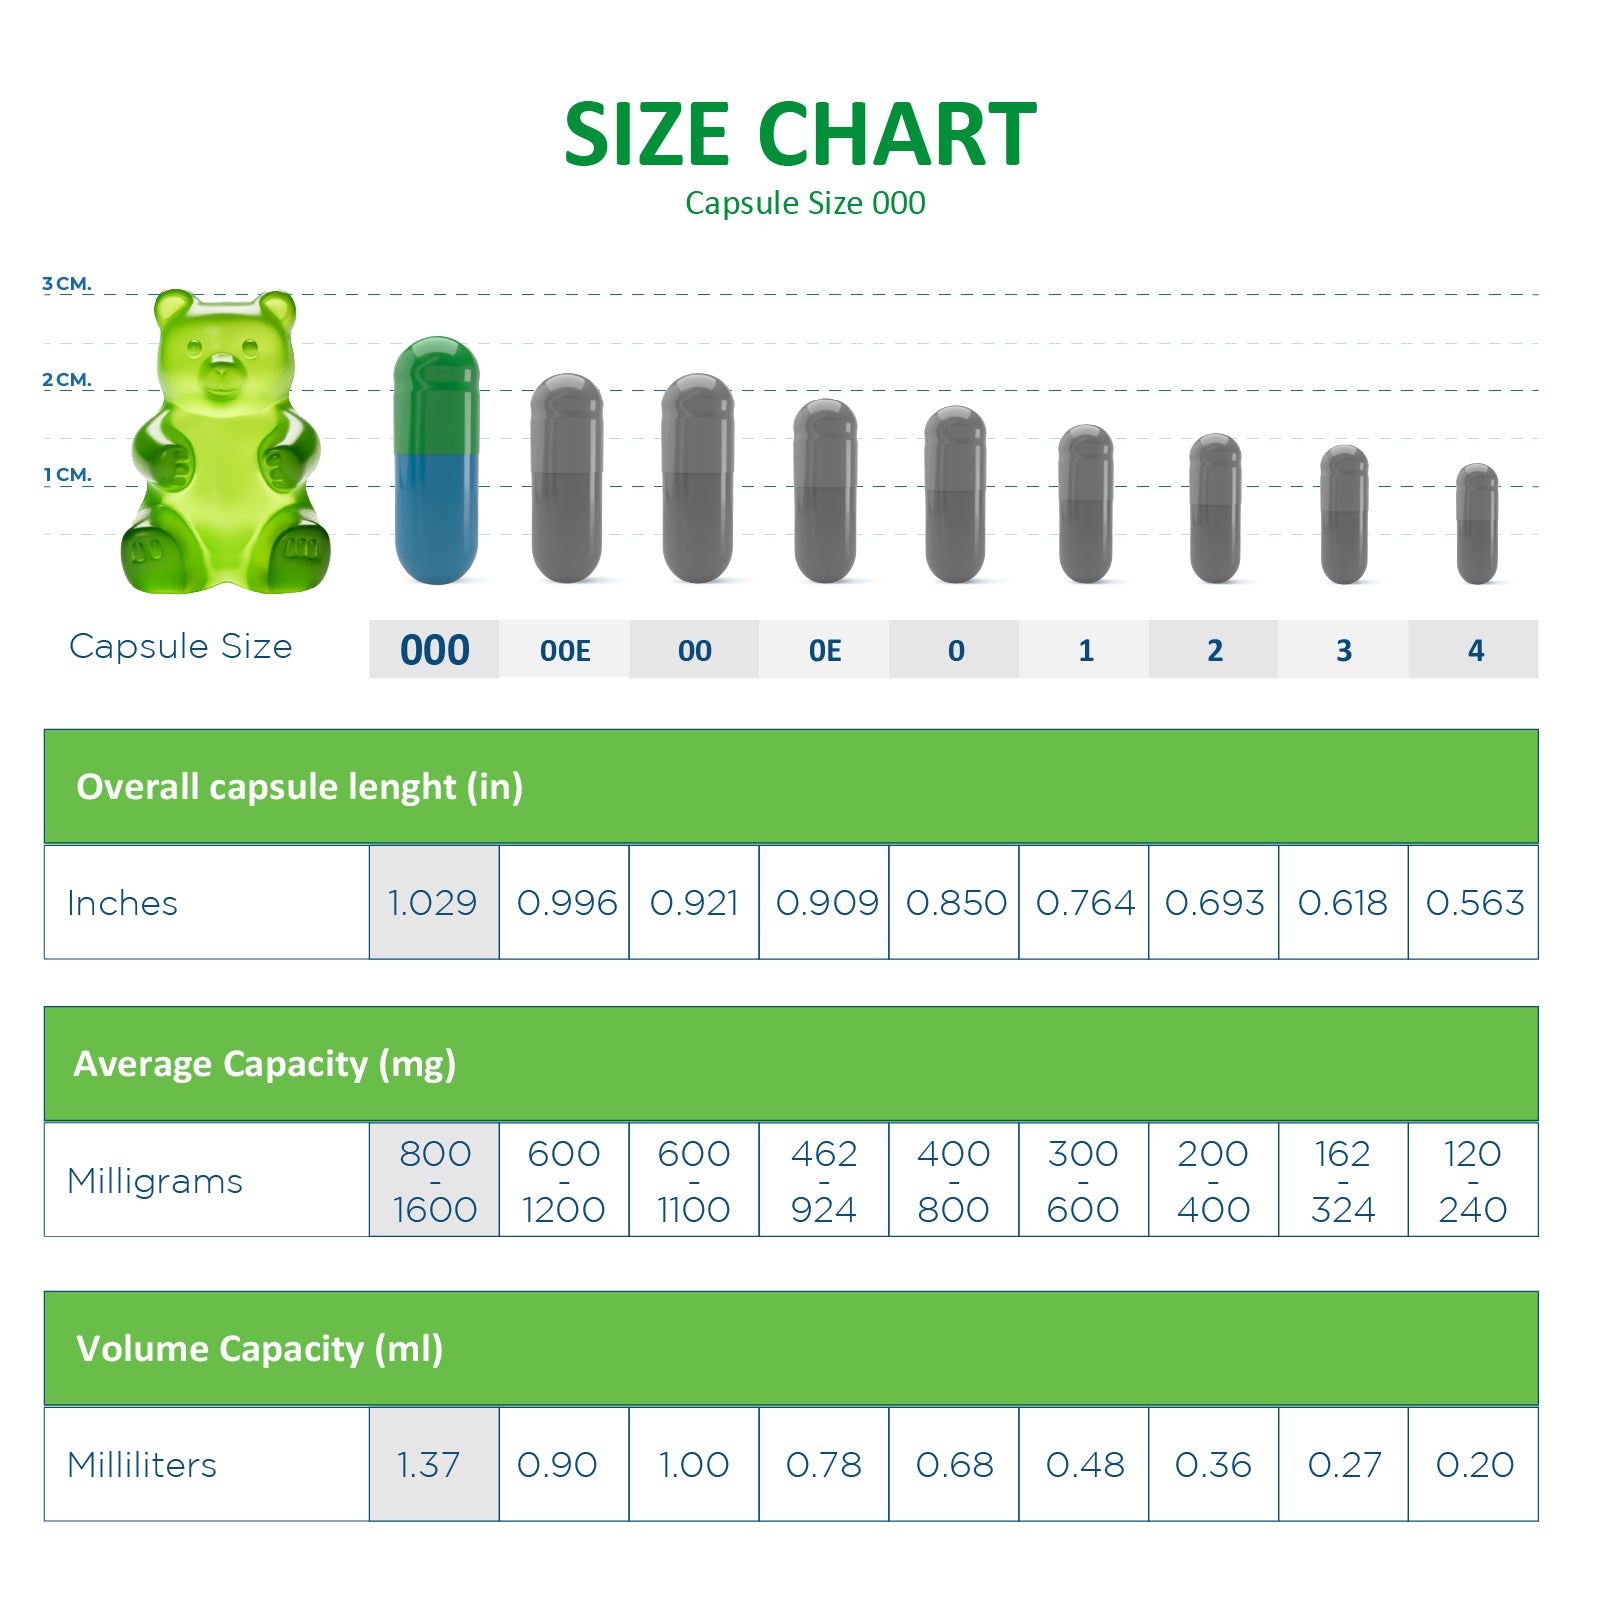 size chart for size 000